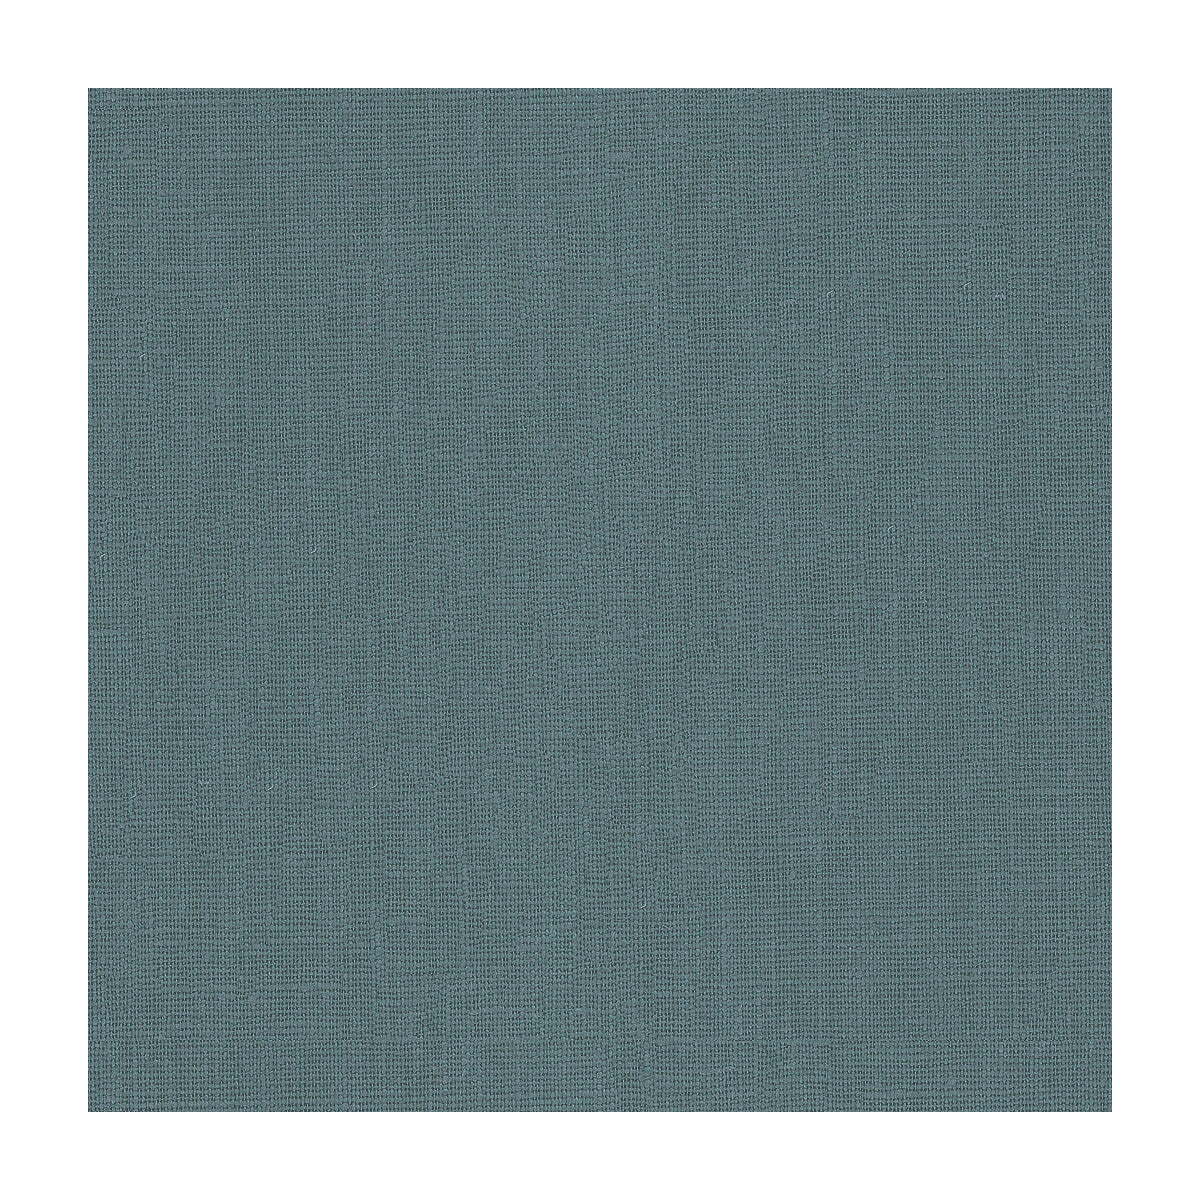 Kravet Basics fabric in 32344-1515 color - pattern 32344.1515.0 - by Kravet Basics in the Perfect Plains collection